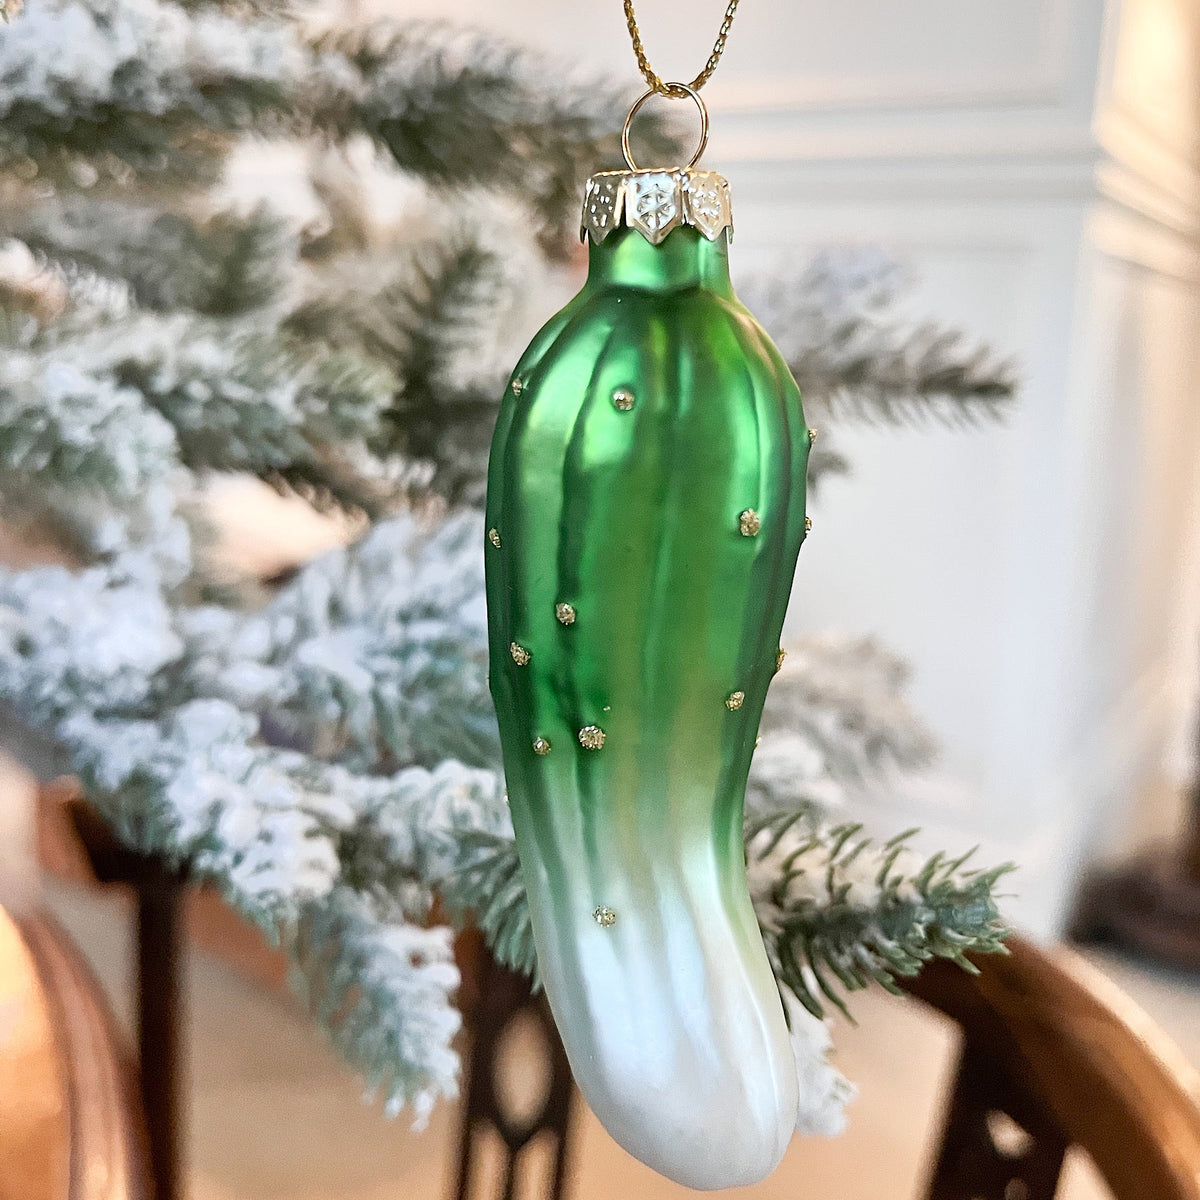 Imperfect German Pickle Ornament